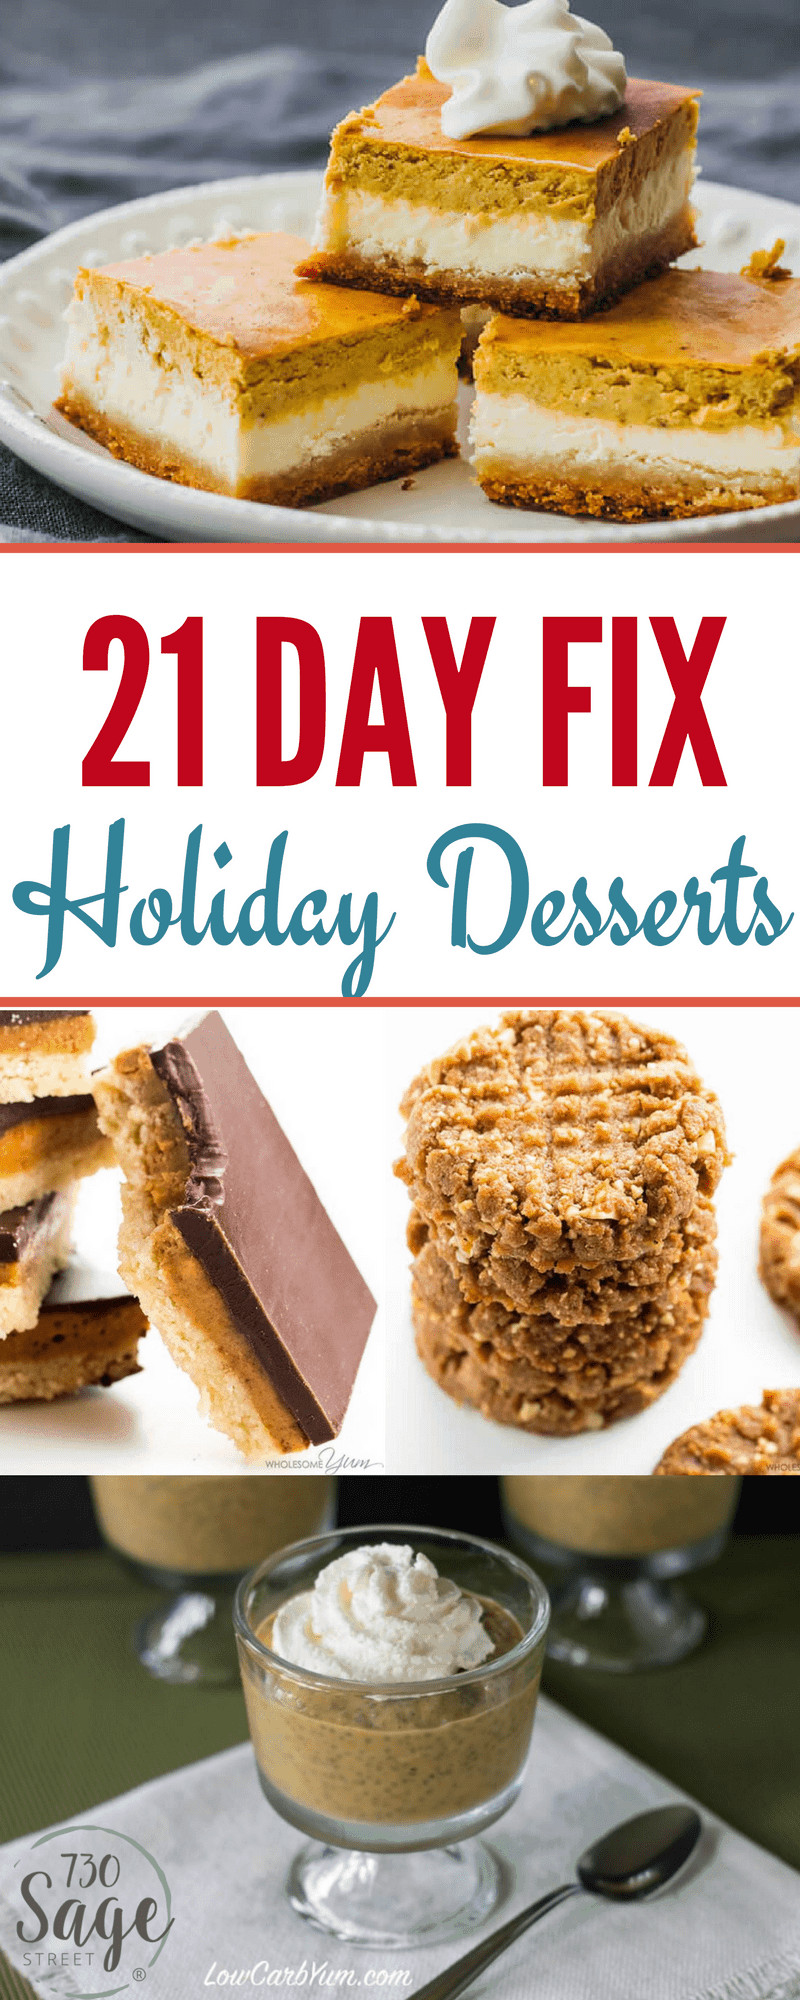 21 Day Fix Desserts
 21 Day Fix Holiday Desserts Delicious & Guilt Free 730